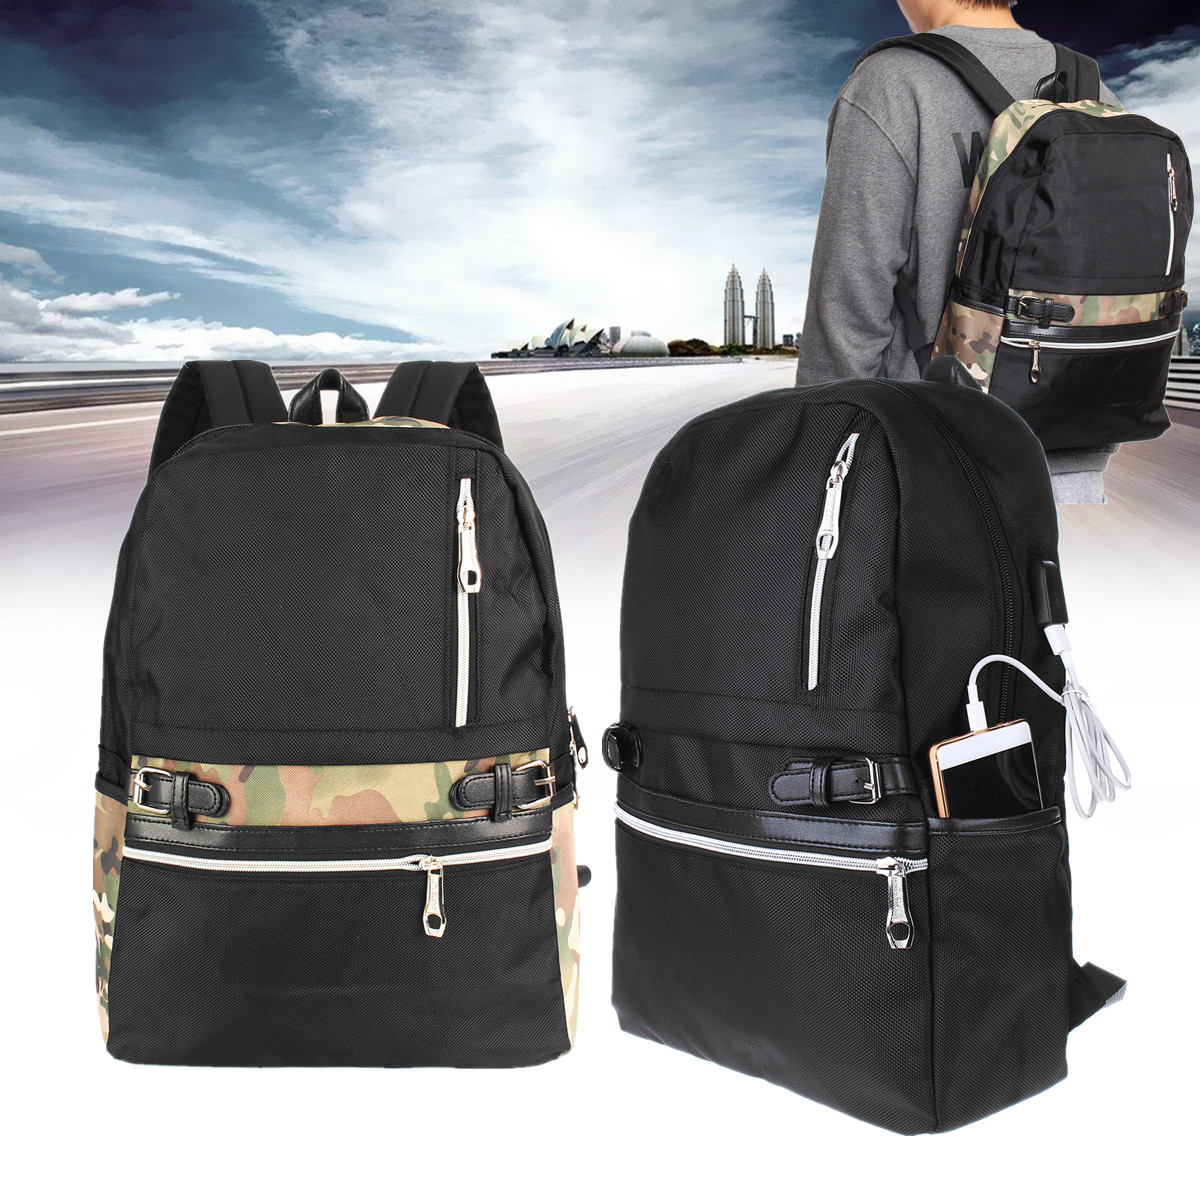 295x125x435cm-Anti-Theft-Waterproof-Backpack-With-USB-Charging-Port-Outdoor-Travel-Fishing-Bag-1287206-1